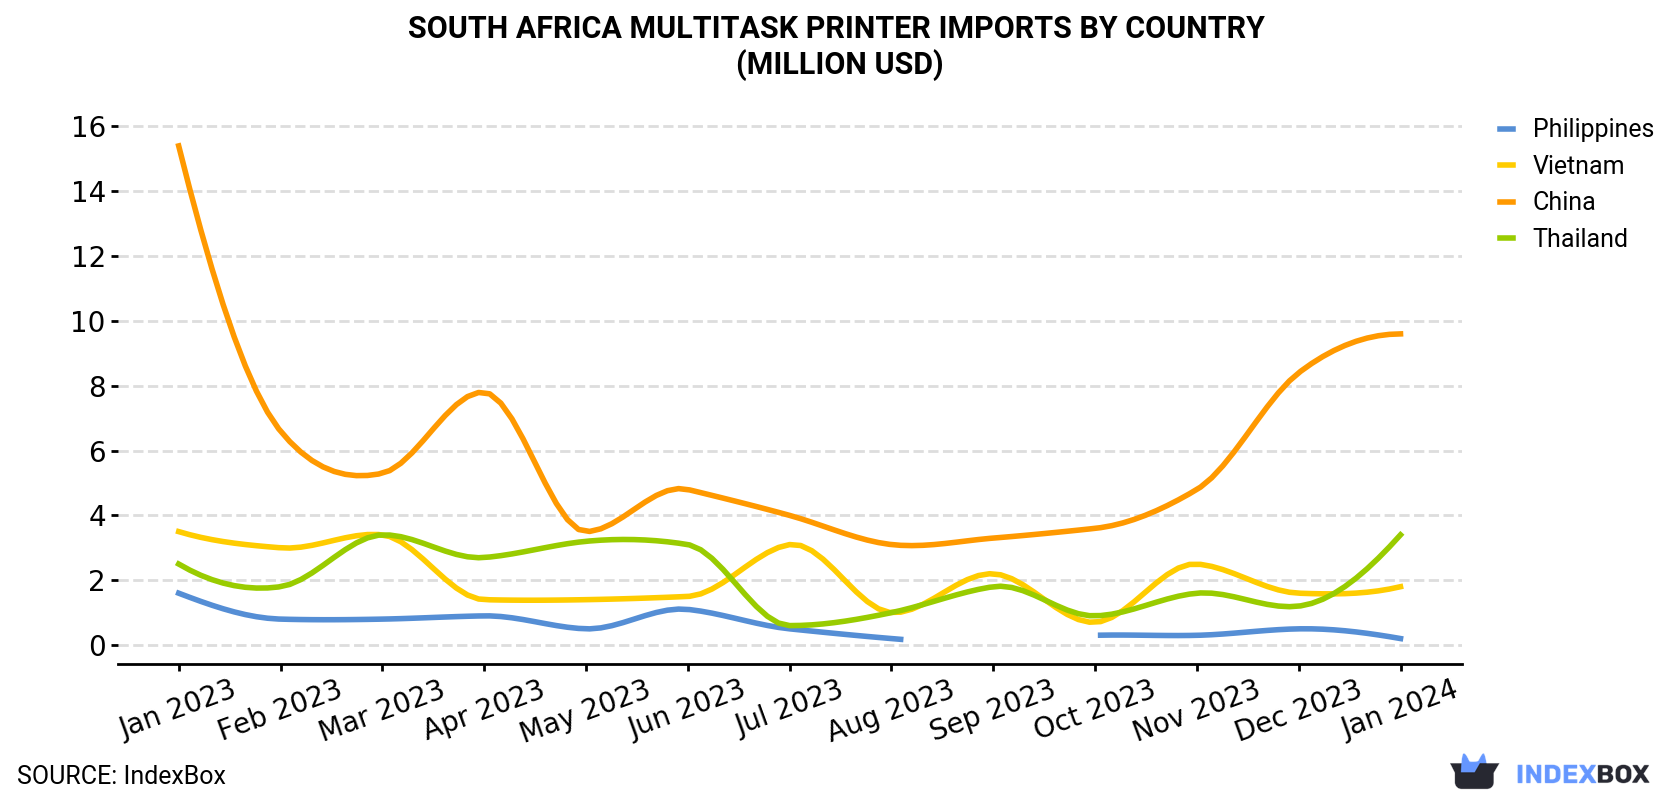 South Africa Multitask Printer Imports By Country (Million USD)